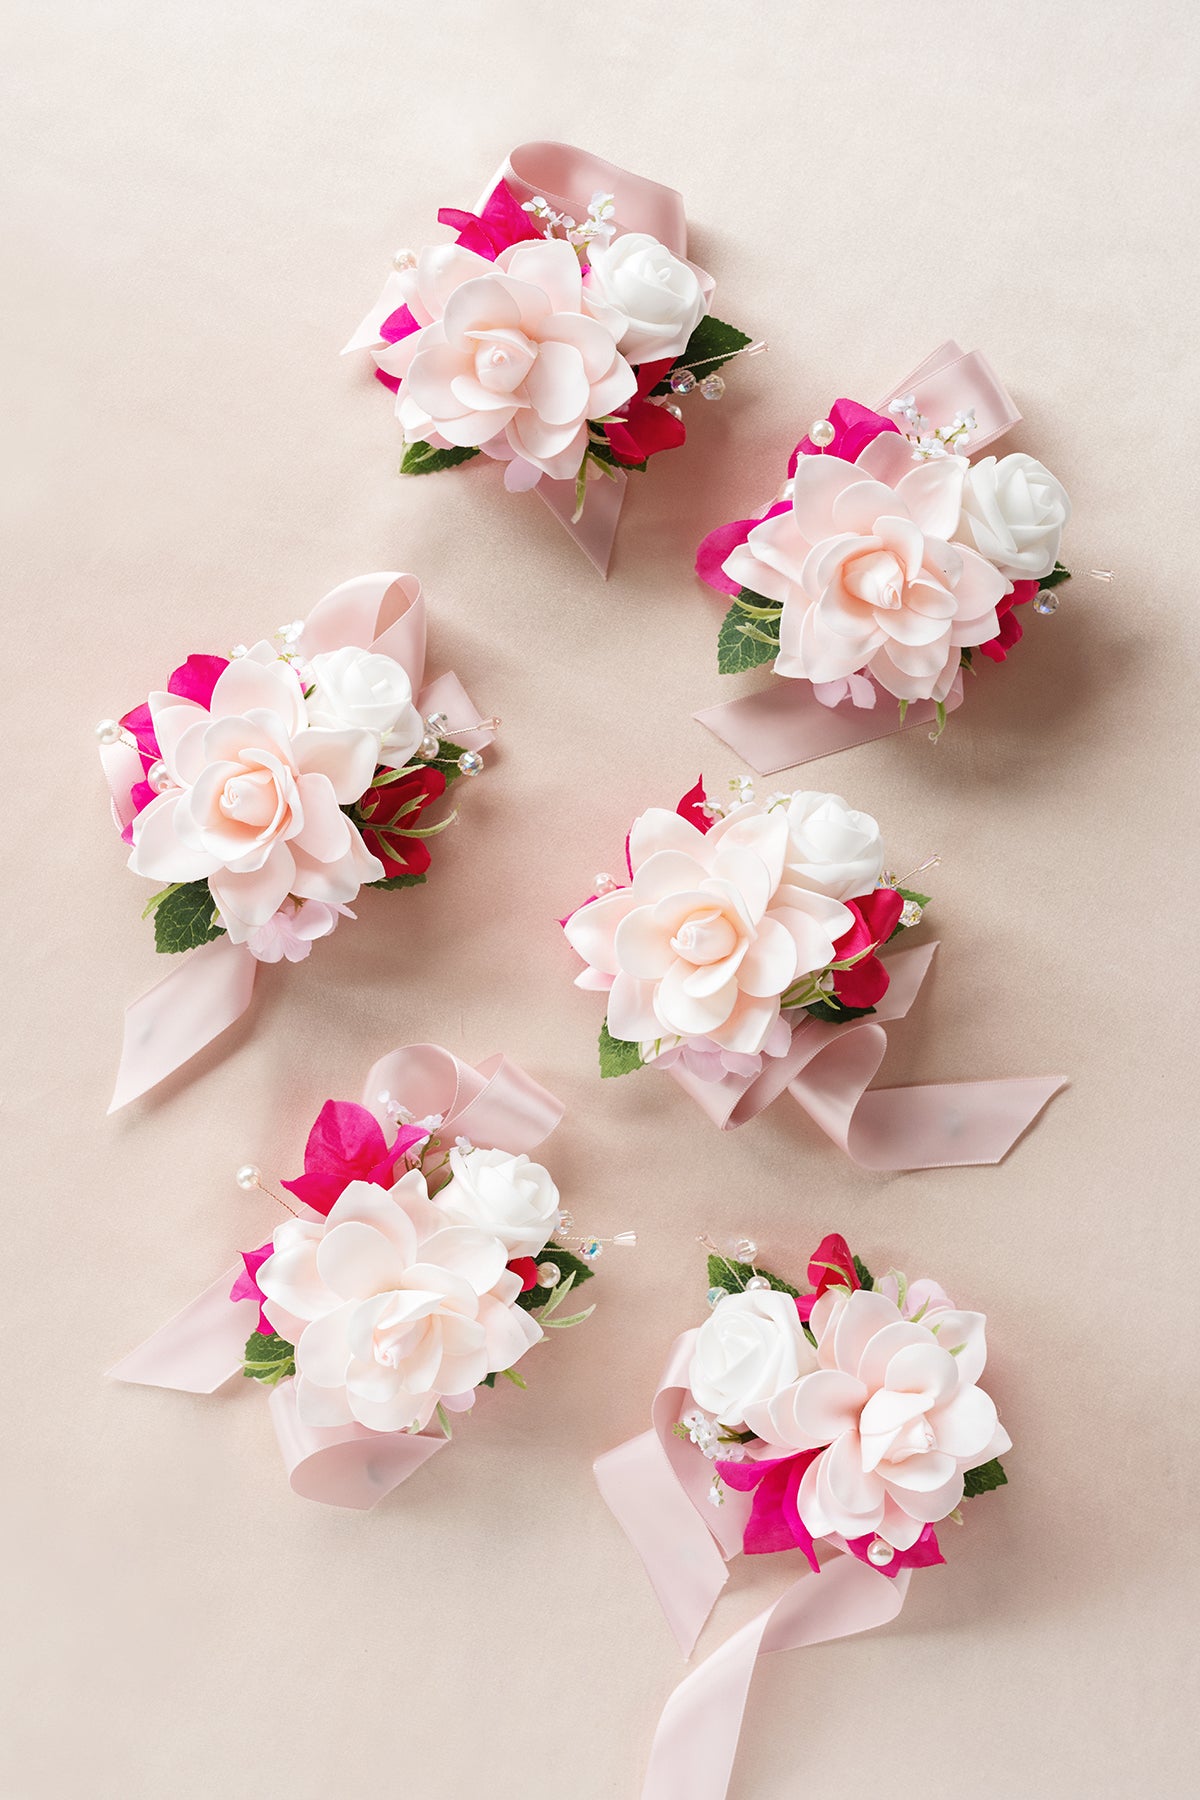 Wrist Corsages in Passionate Pink & Blush